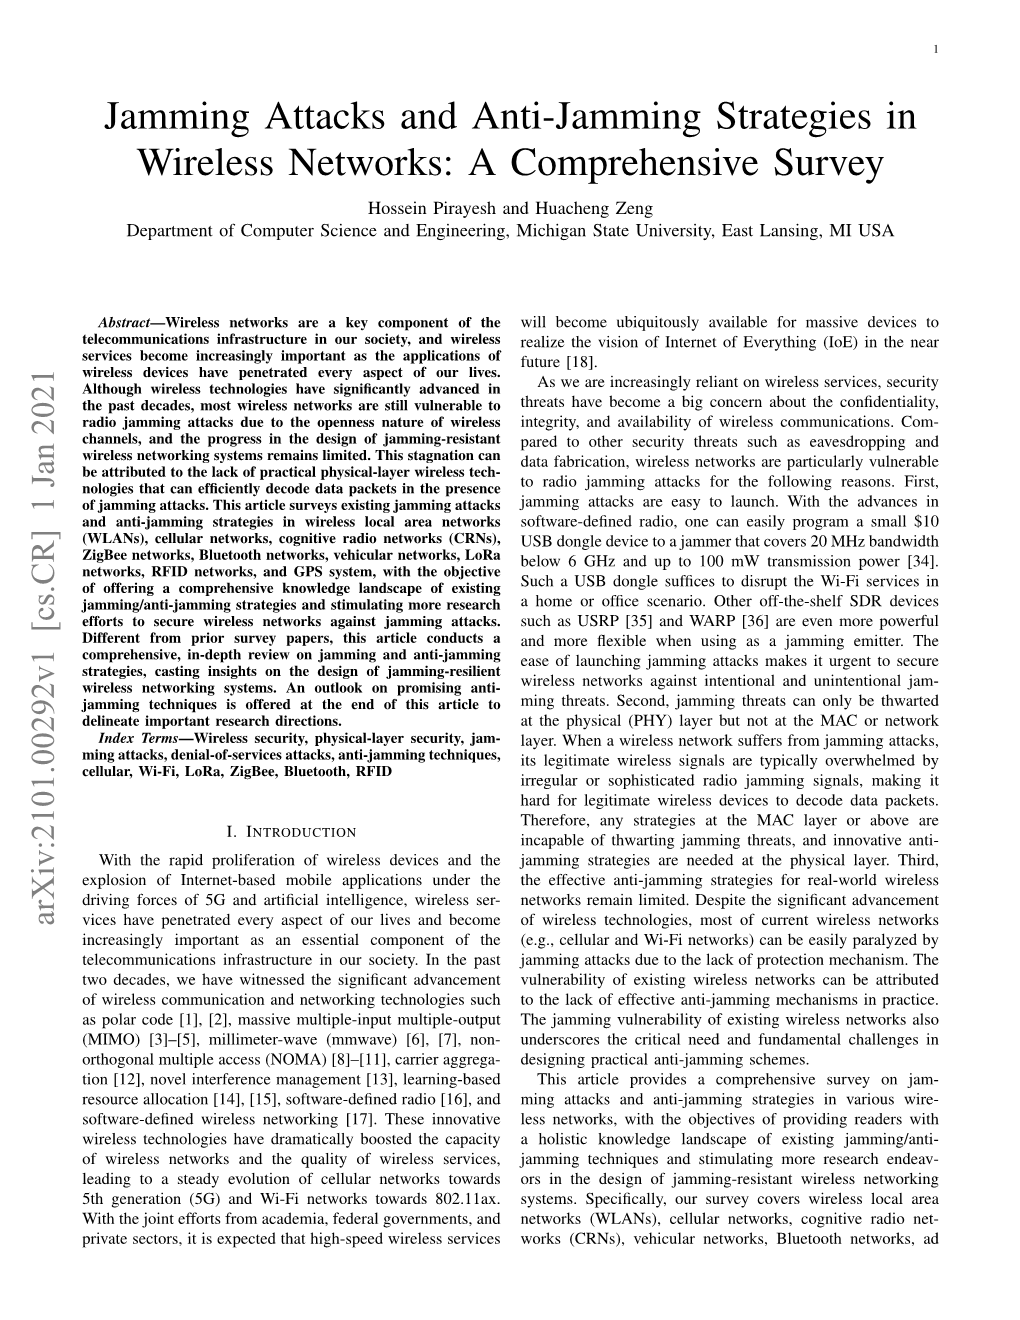 Jamming Attacks and Anti-Jamming Strategies in Wireless Networks